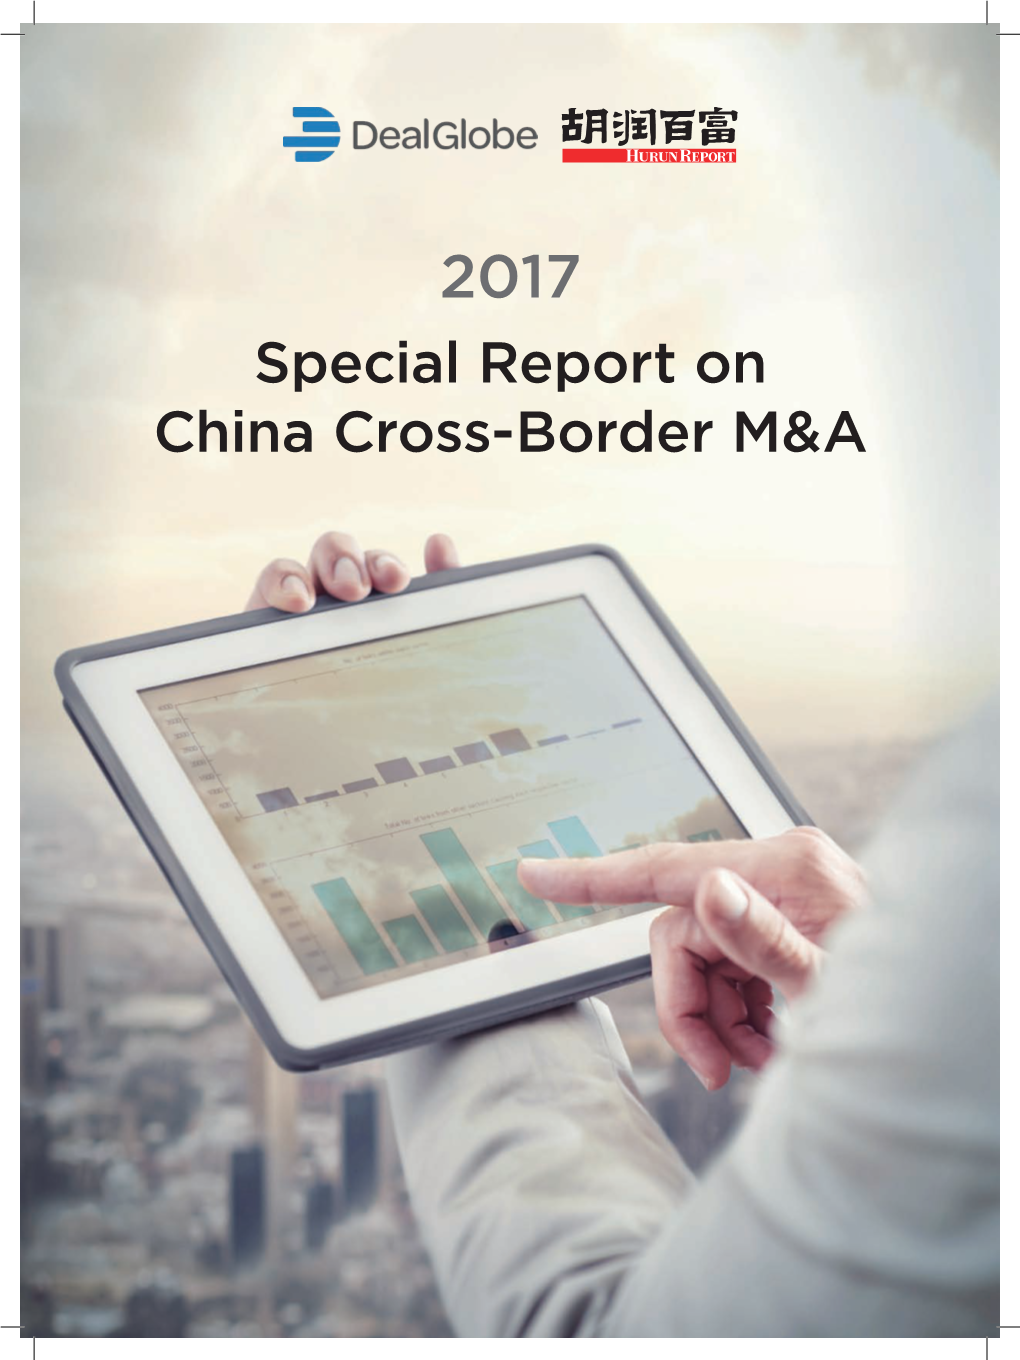 Special Report on China Cross-Border M&A